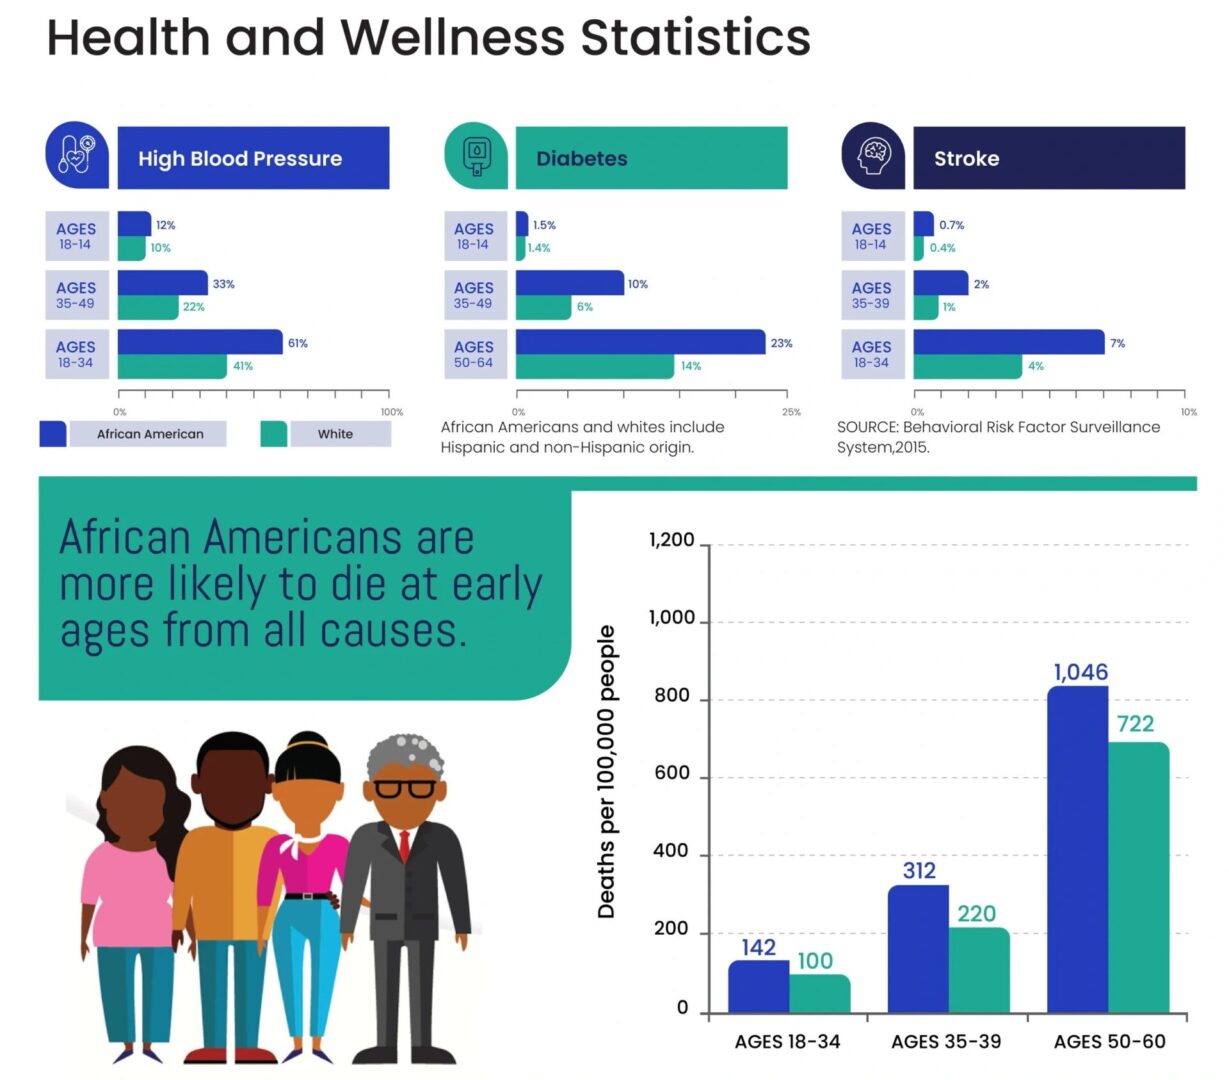 A graphic showing the health and wellness statistics.